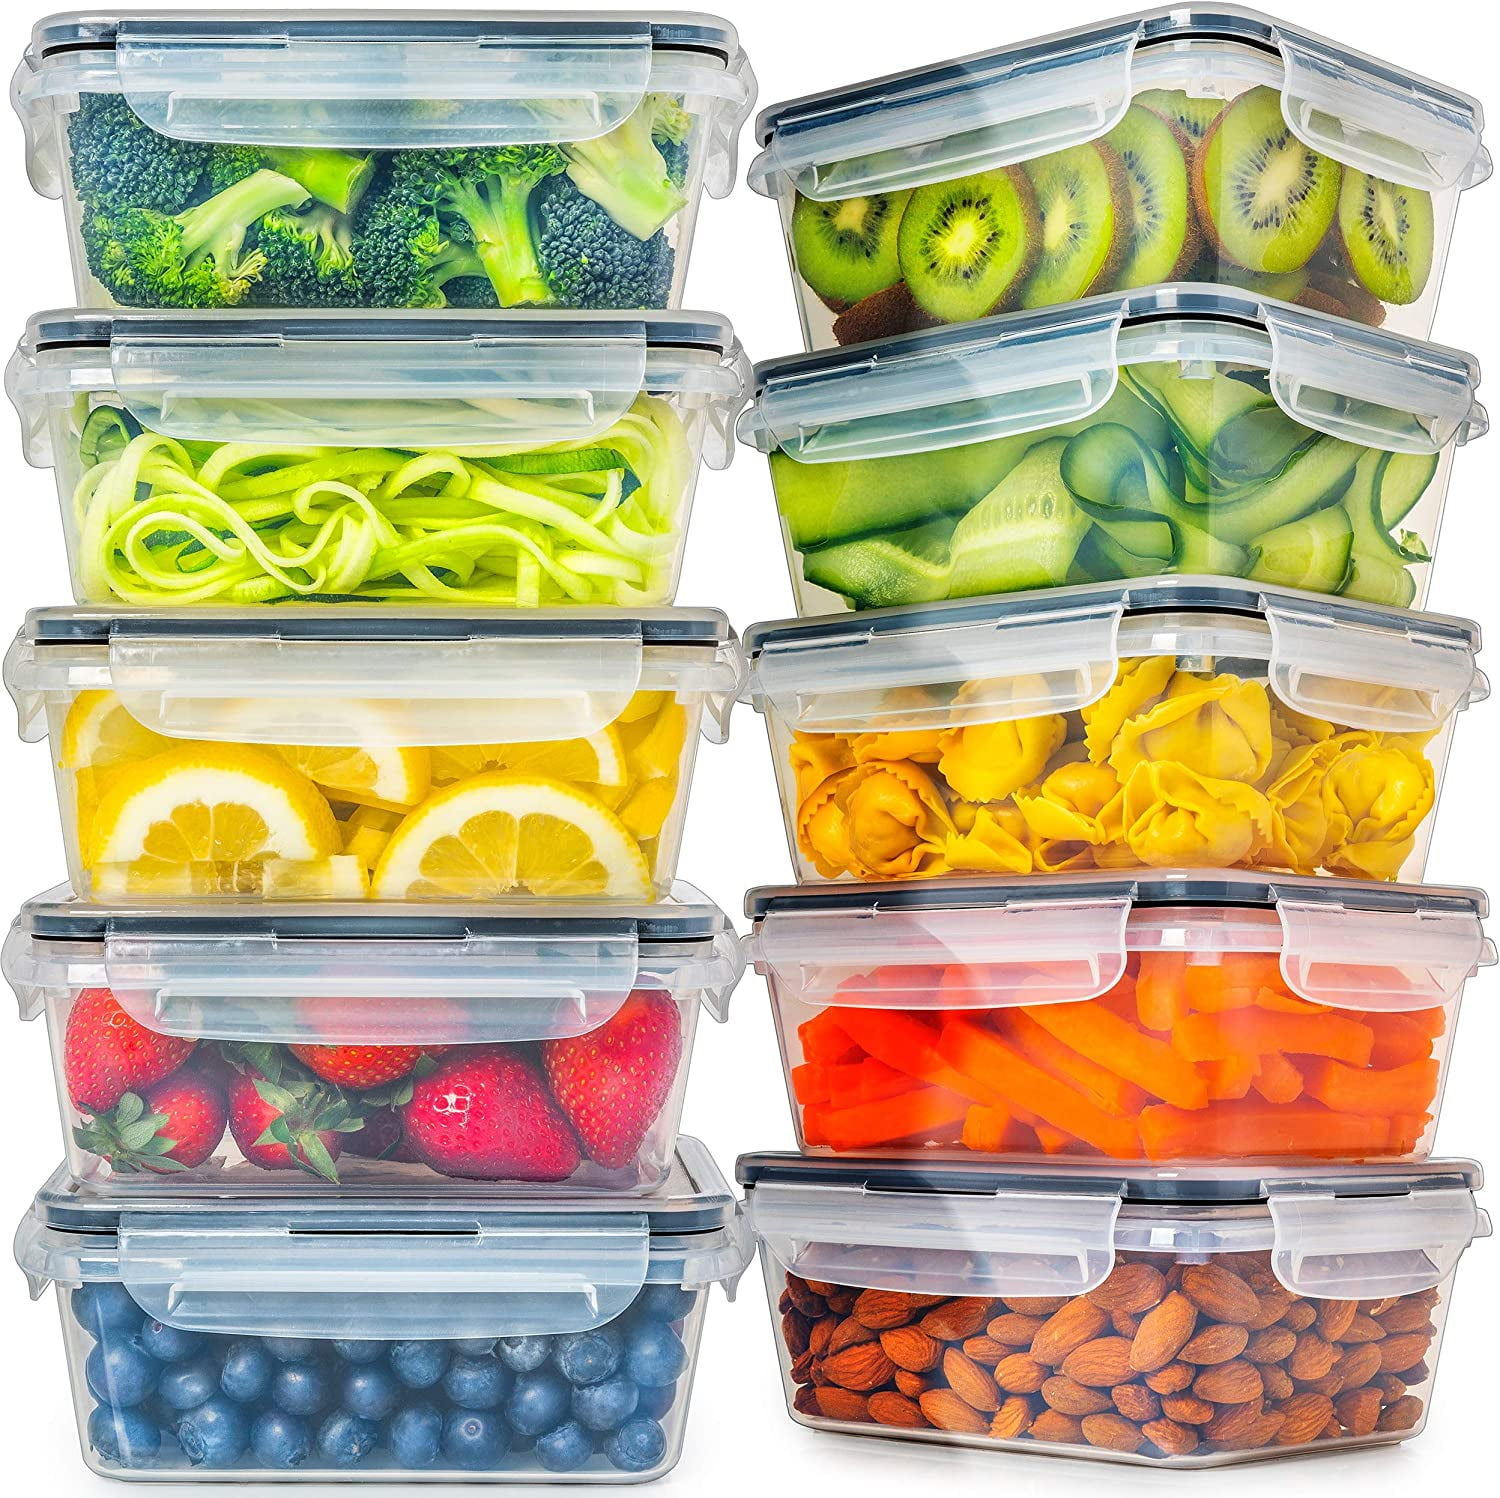 Food Storage Containers with Lids - Plastic Food Containers with Lids - Plastic  Containers with Lids Storage (20 Pack) - Plastic Storage Containers with Lids  Food Container Set BPA-Free Containers - Shop - TexasRealFood